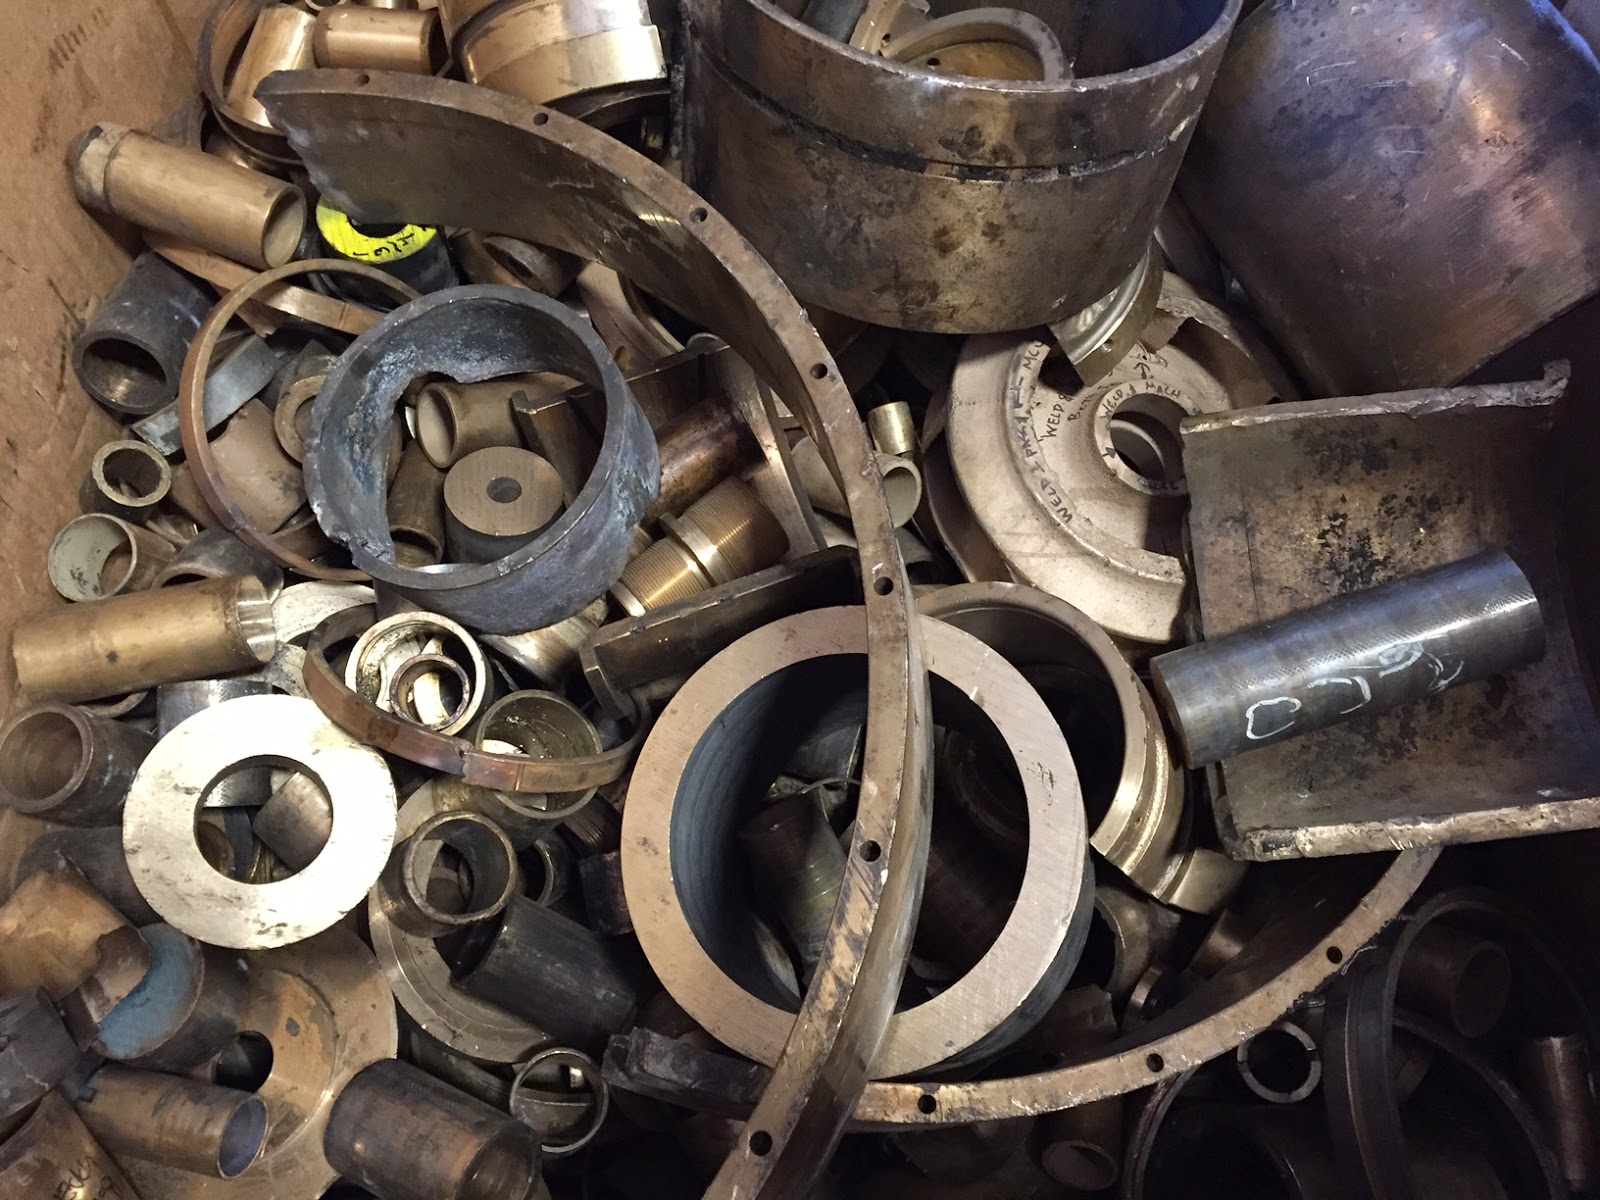 How do you find current scrap-metal prices in North Carolina?